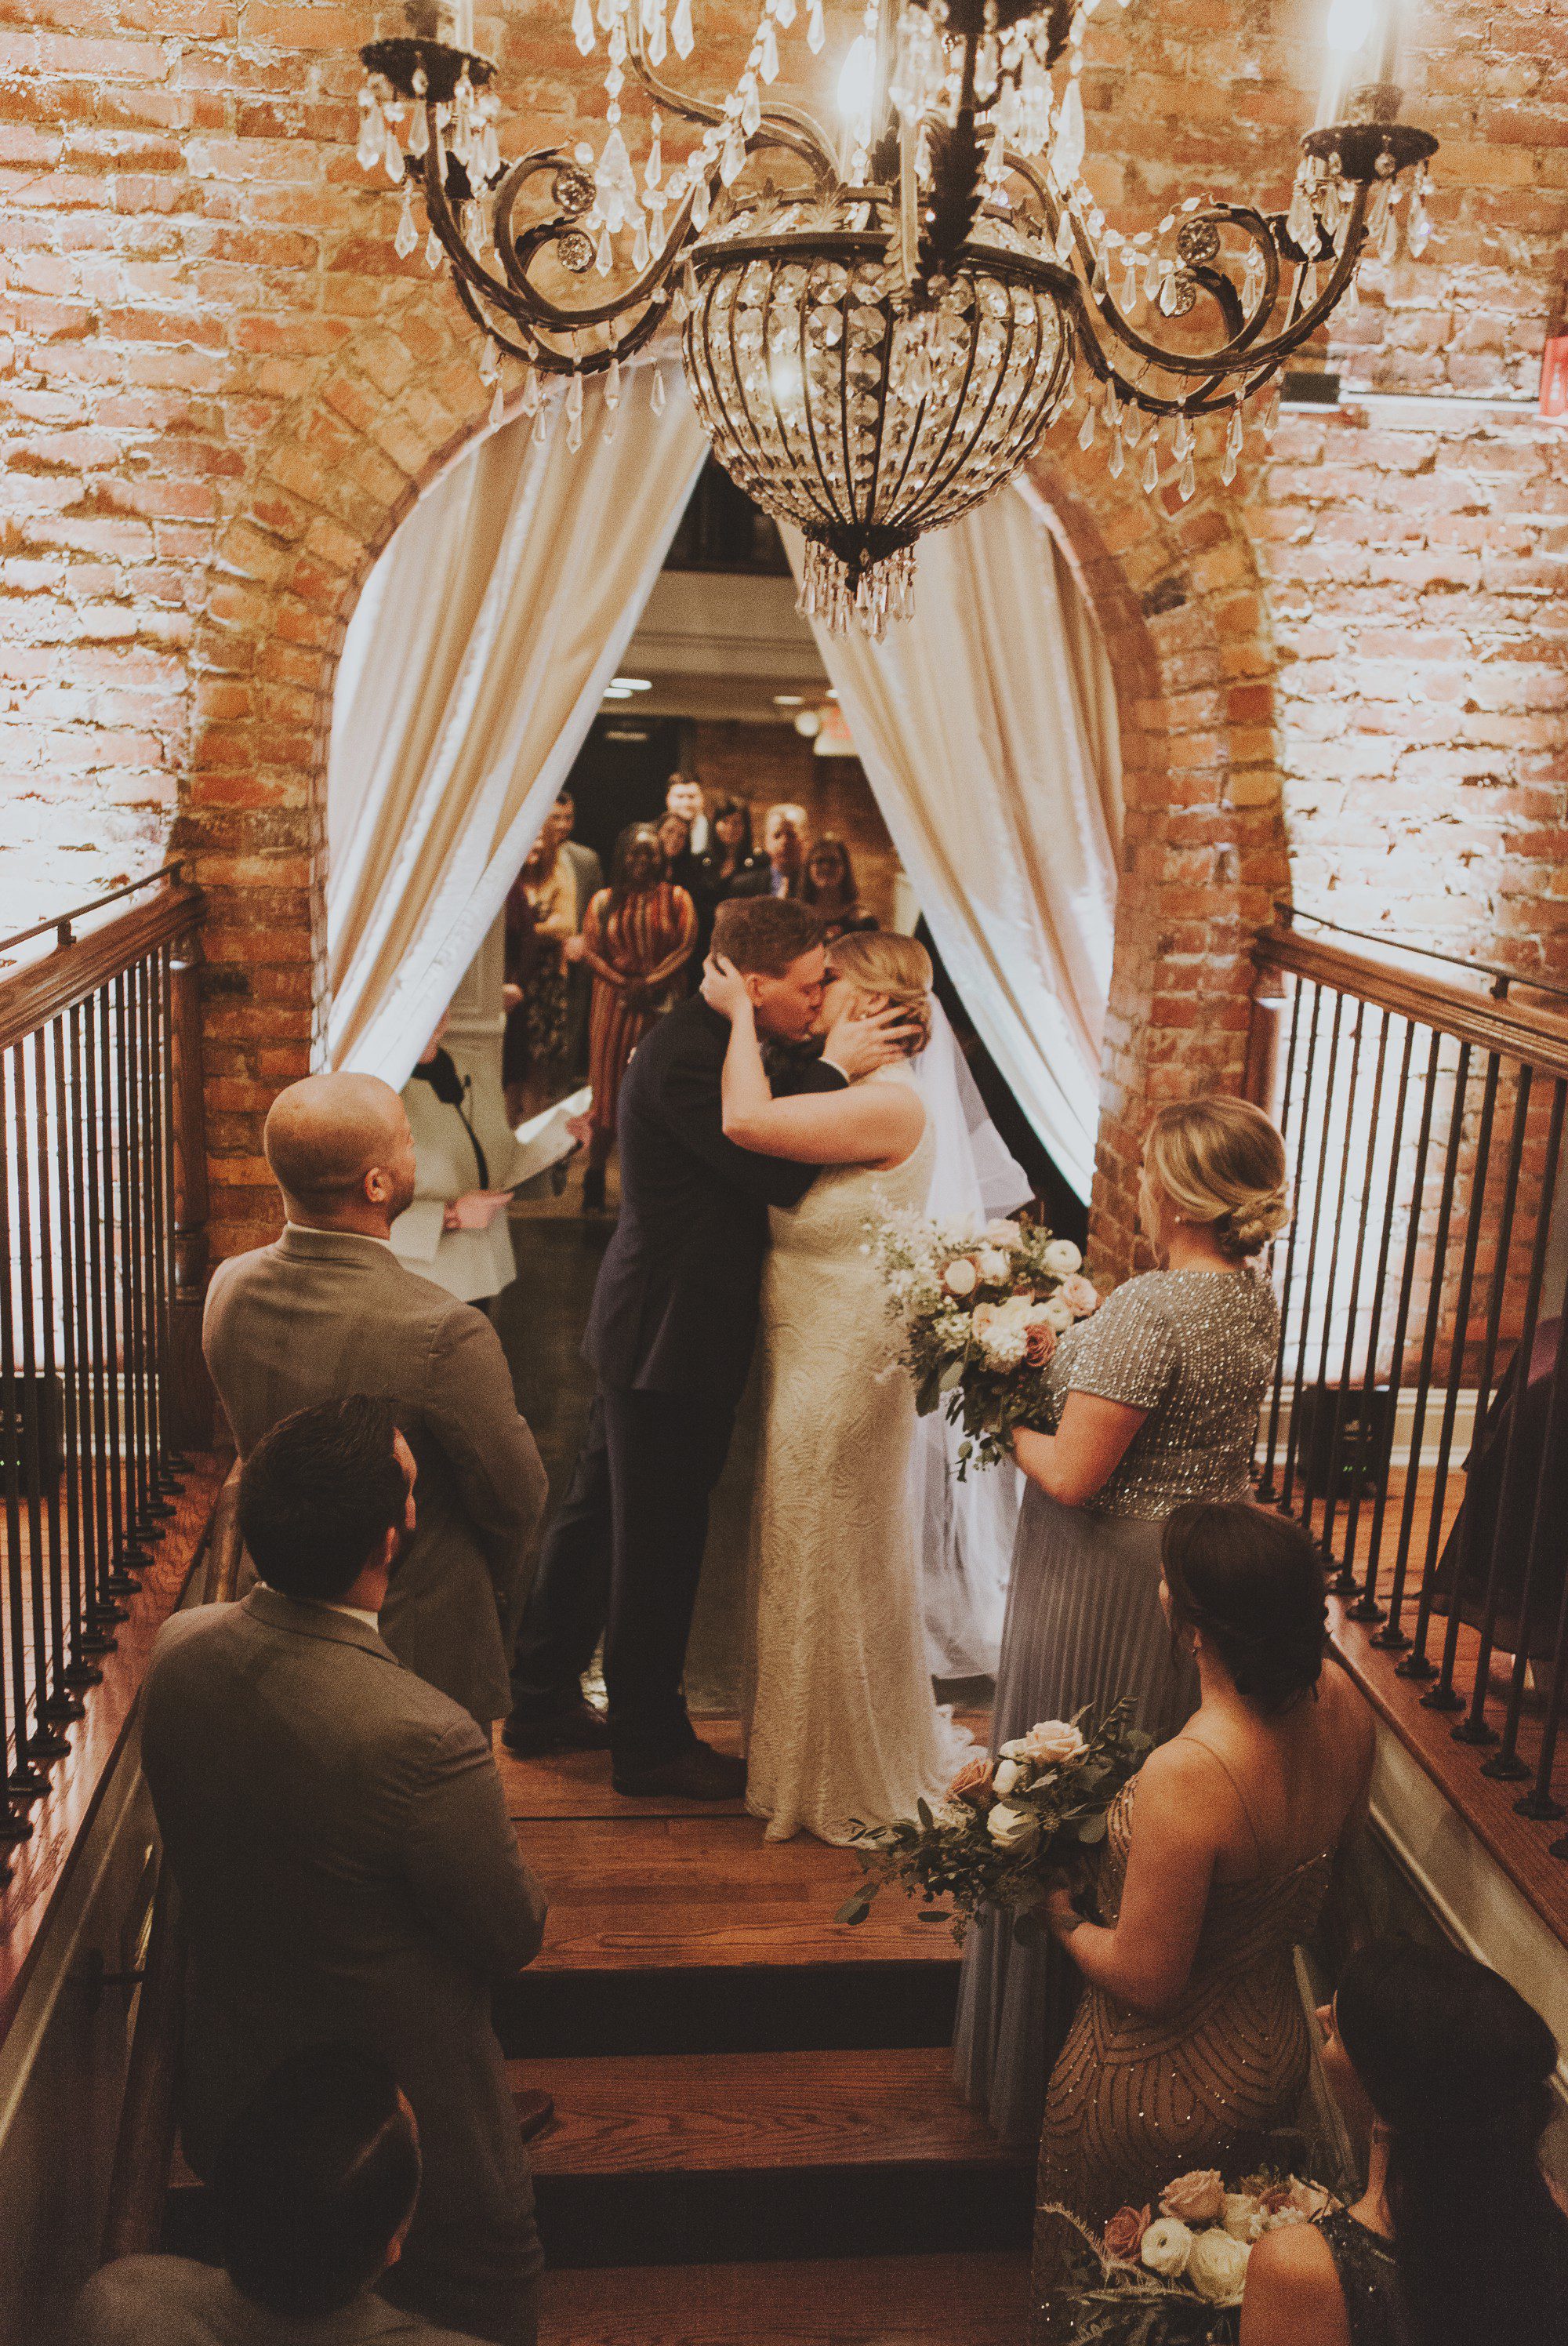 Beautiful wedding ceremony on stairs underneath chandeleir at McConnell House in Franklin, TN before wedding ceremony. Photos by Krista Lee Photography Nashville, TN